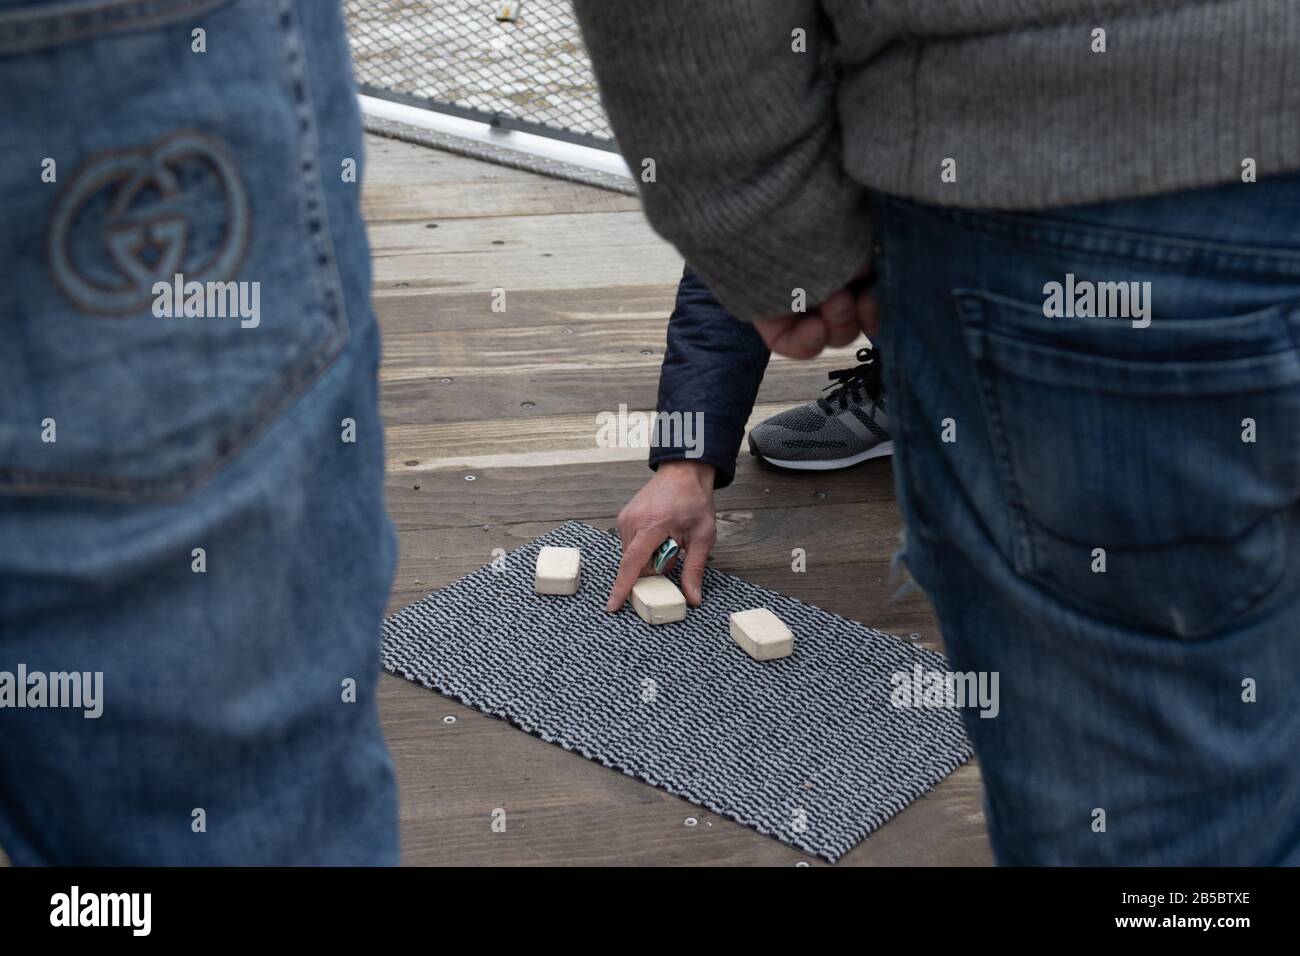 Helsinki, Finland - 3 March 2020: Street games or scammers, money gambling, Illustrative Editorial Stock Photo